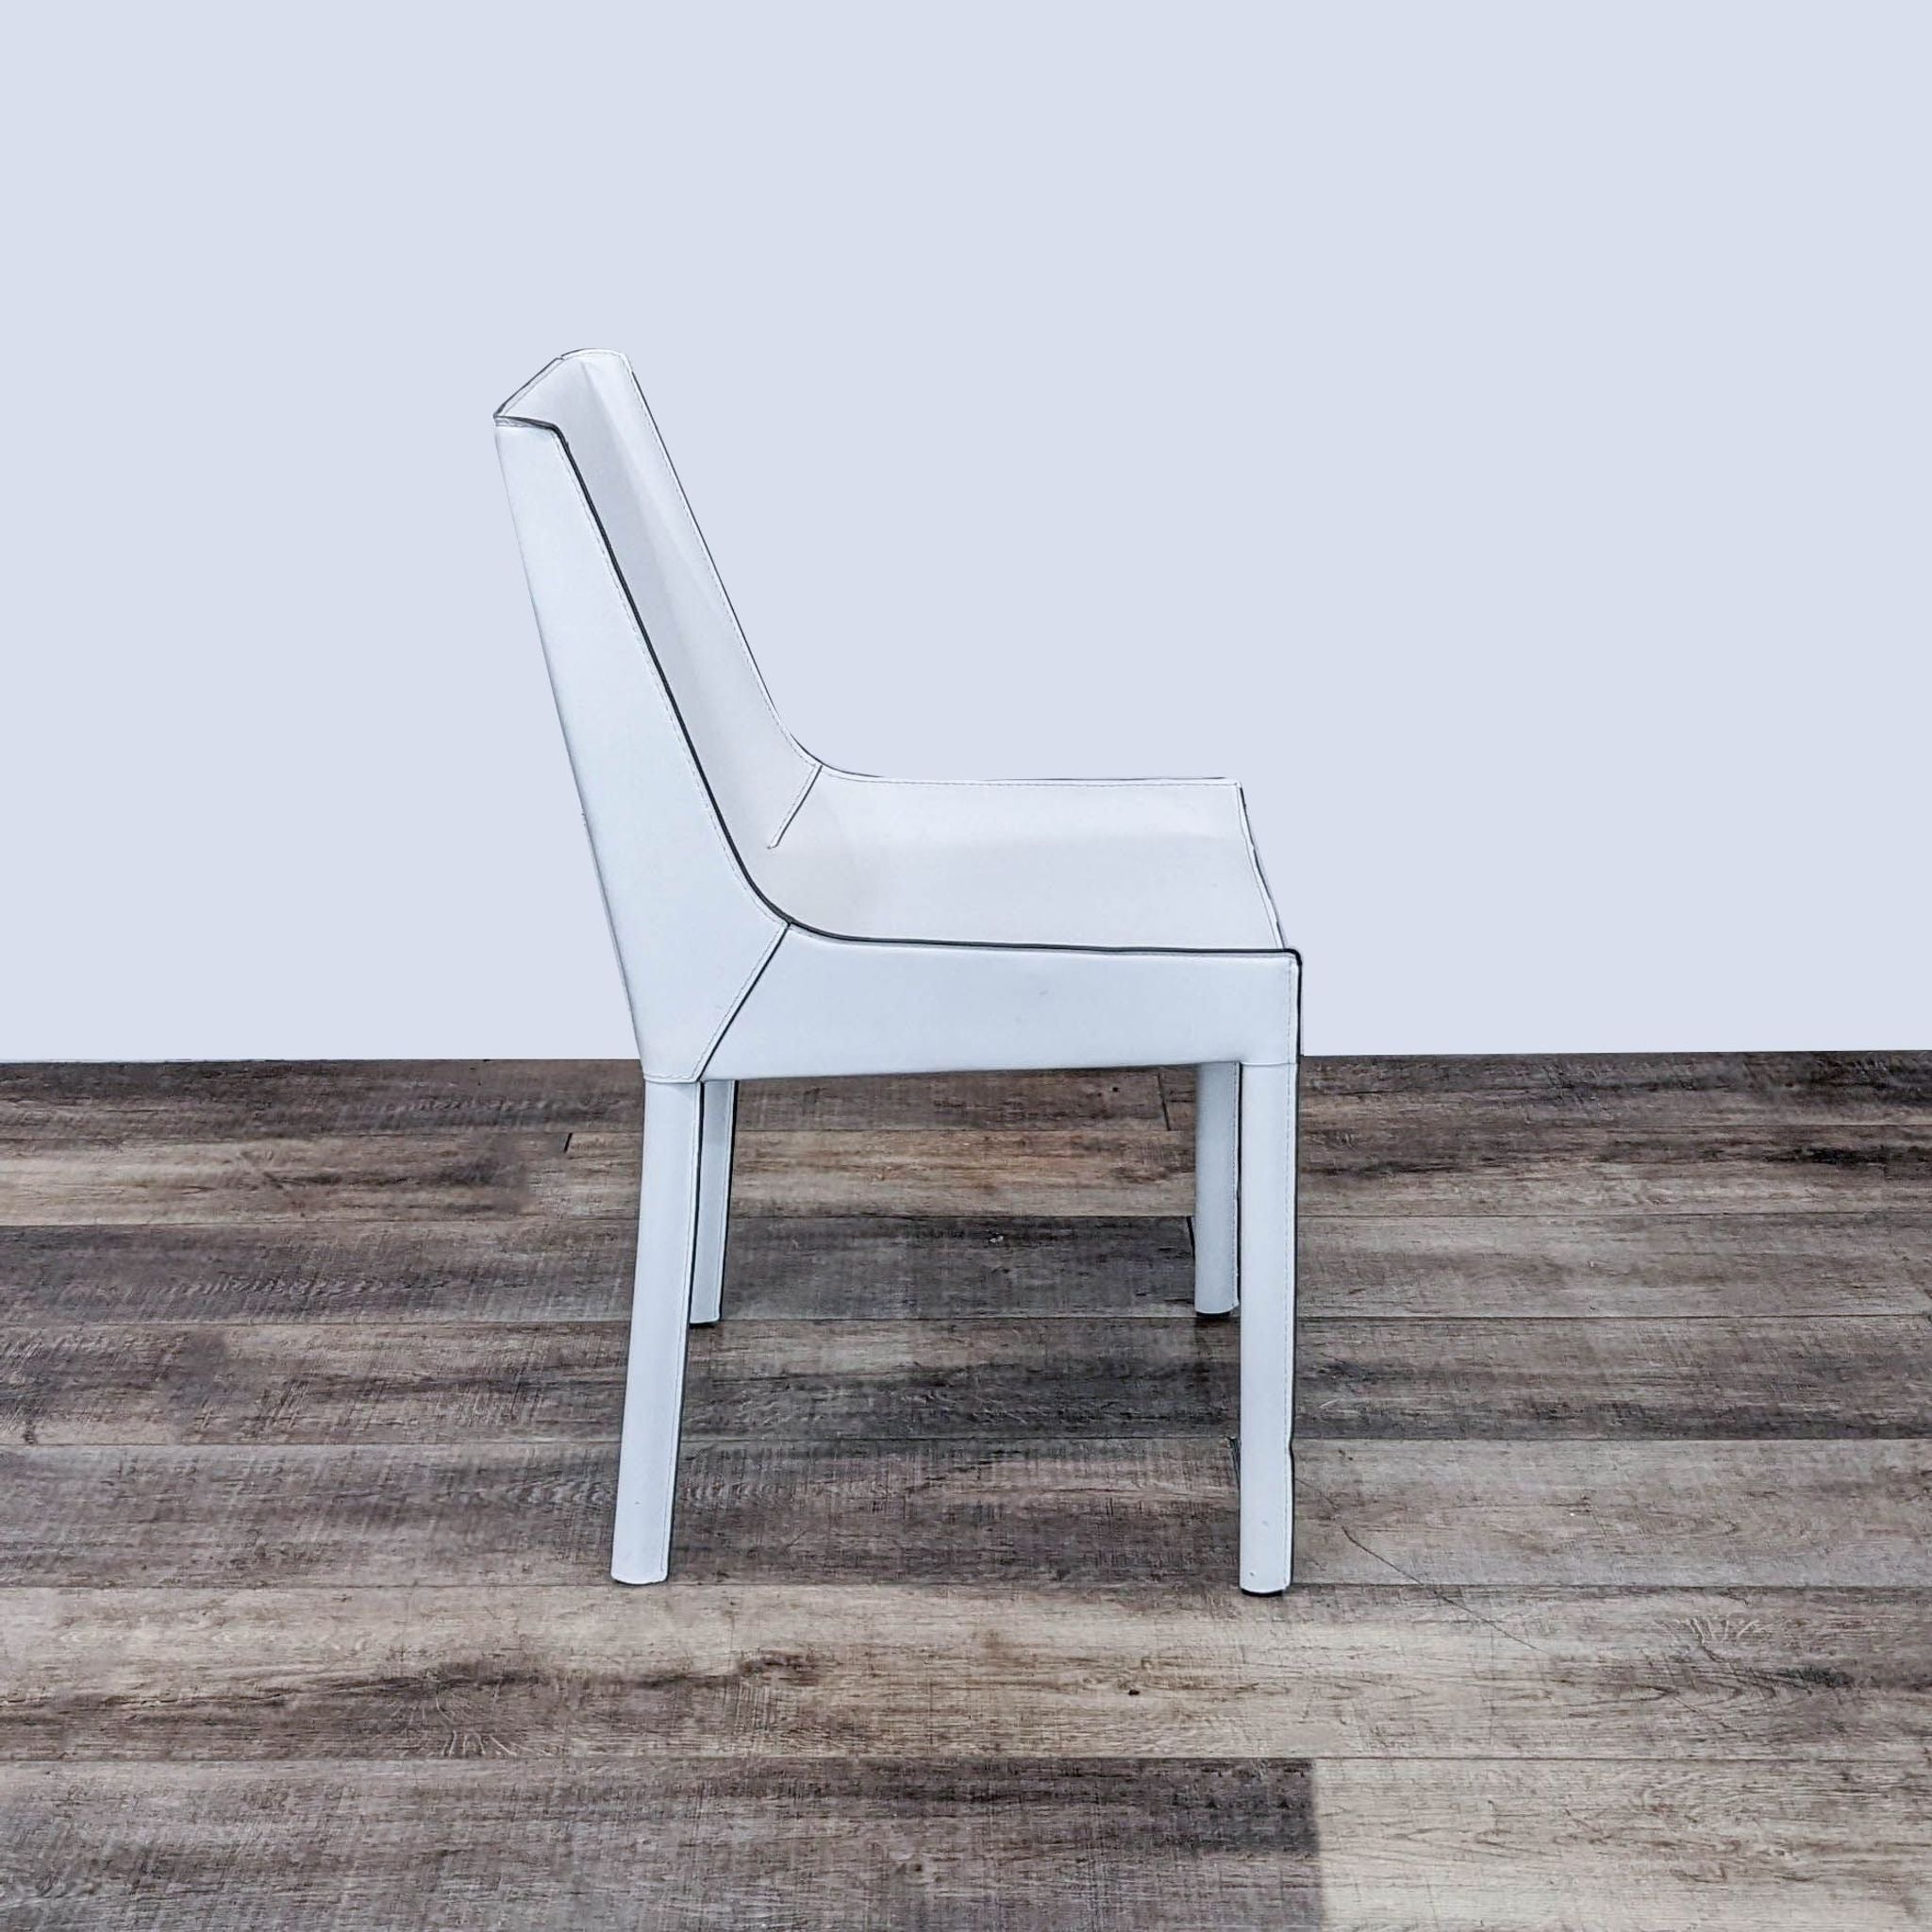 Contemporary white Fashion dining chair by Zuo Modern, featuring recycled leather upholstery and a sleek profile on a wooden floor.